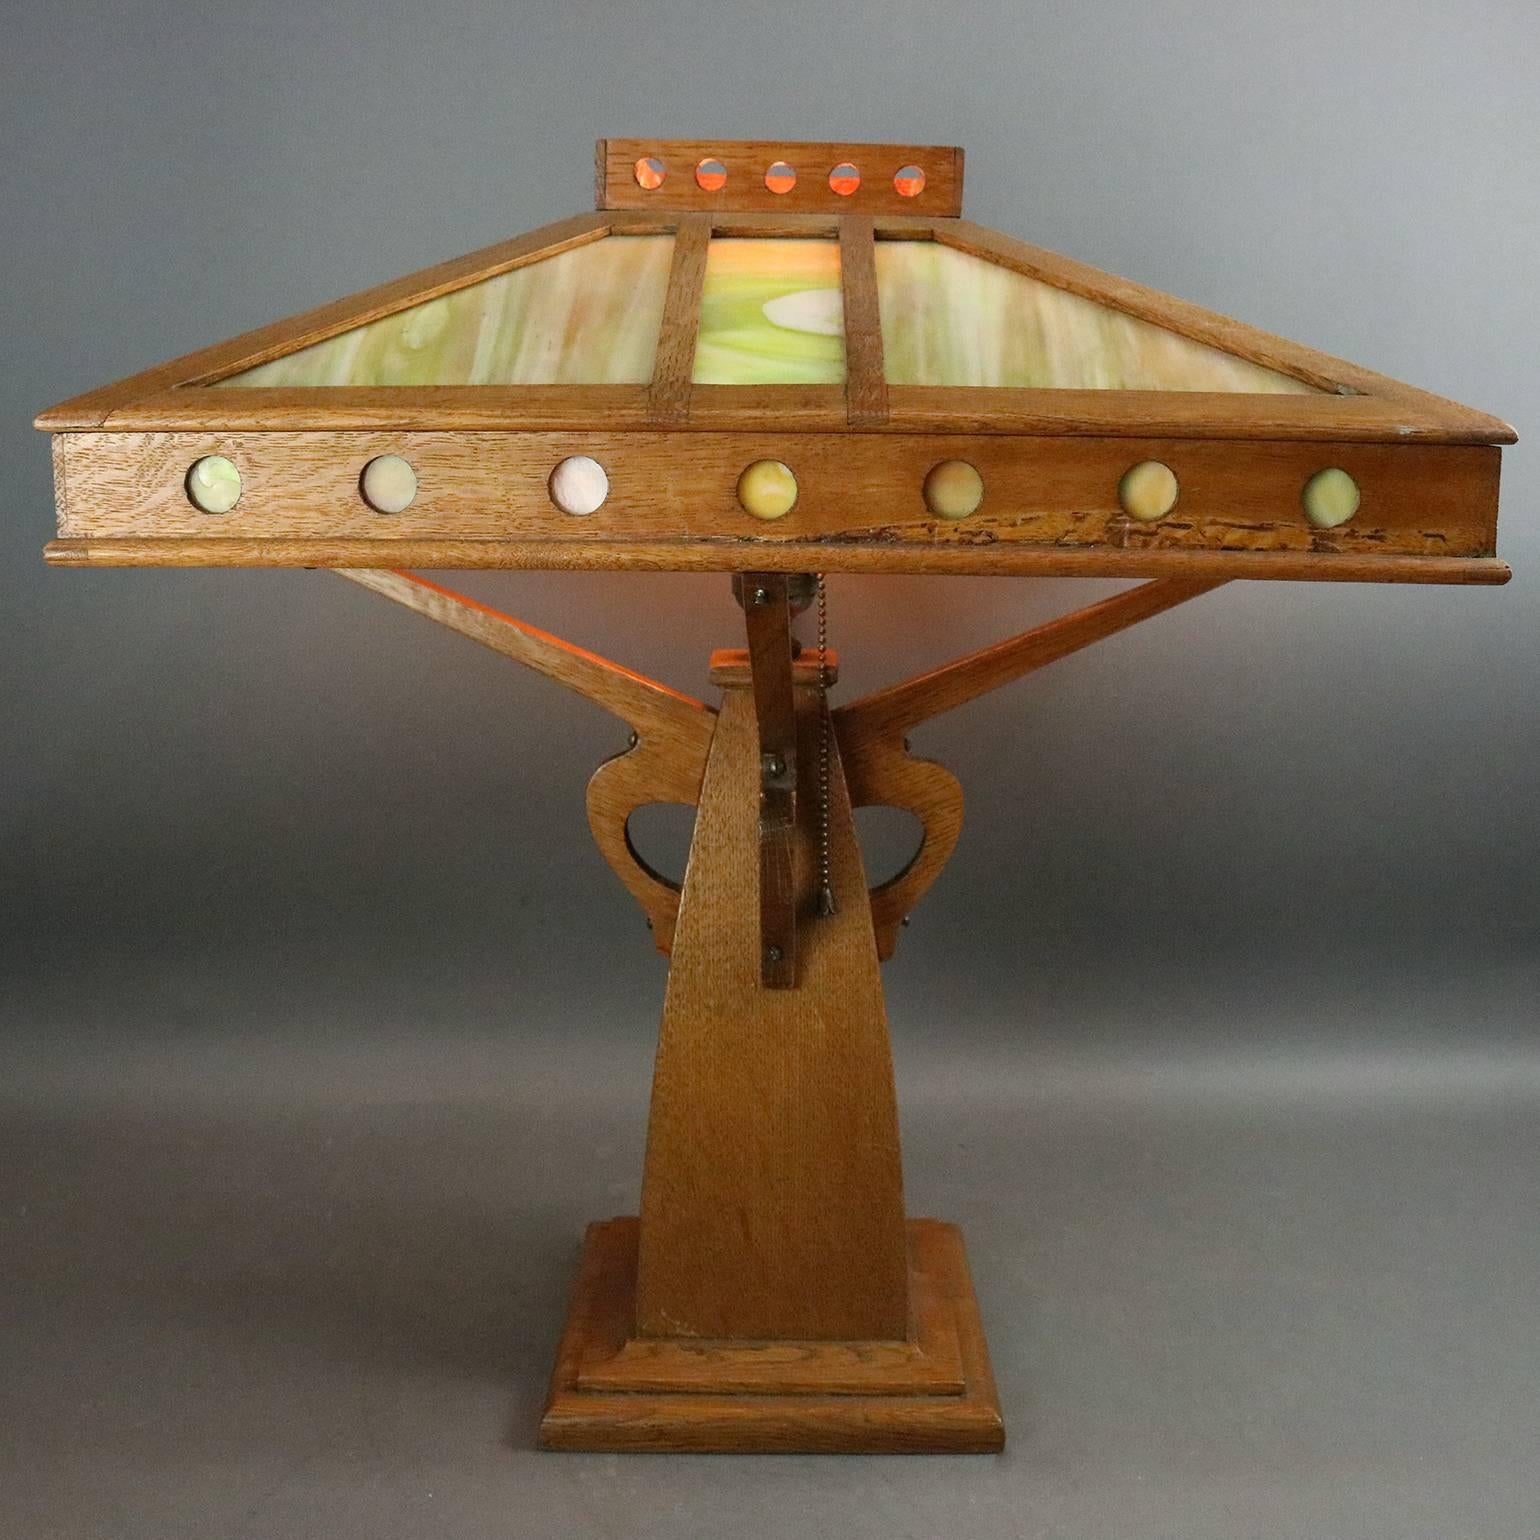 Oversized antique Arts & Crafts Prairie School table lamp by Peterson Art Furniture Co., Faribault, Minnesota, features mission oak construction with pierced oak shade with slag glass panels, supported by S-shaped supports, circa 1910

Measures: